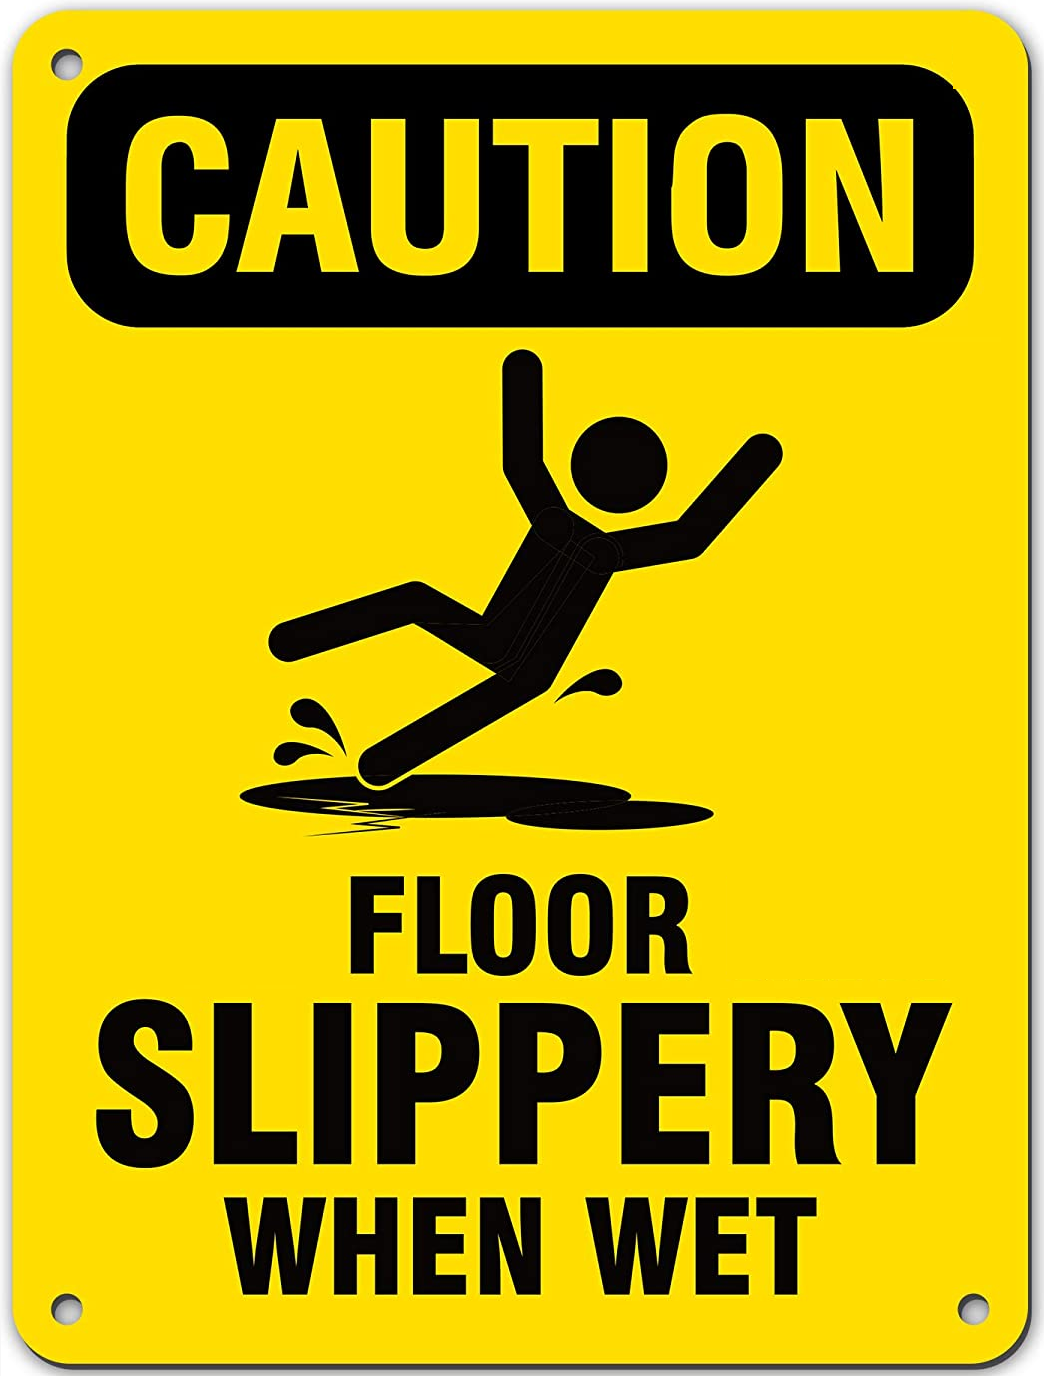 floor slippery when wet sign should be used as the exception and not the norm